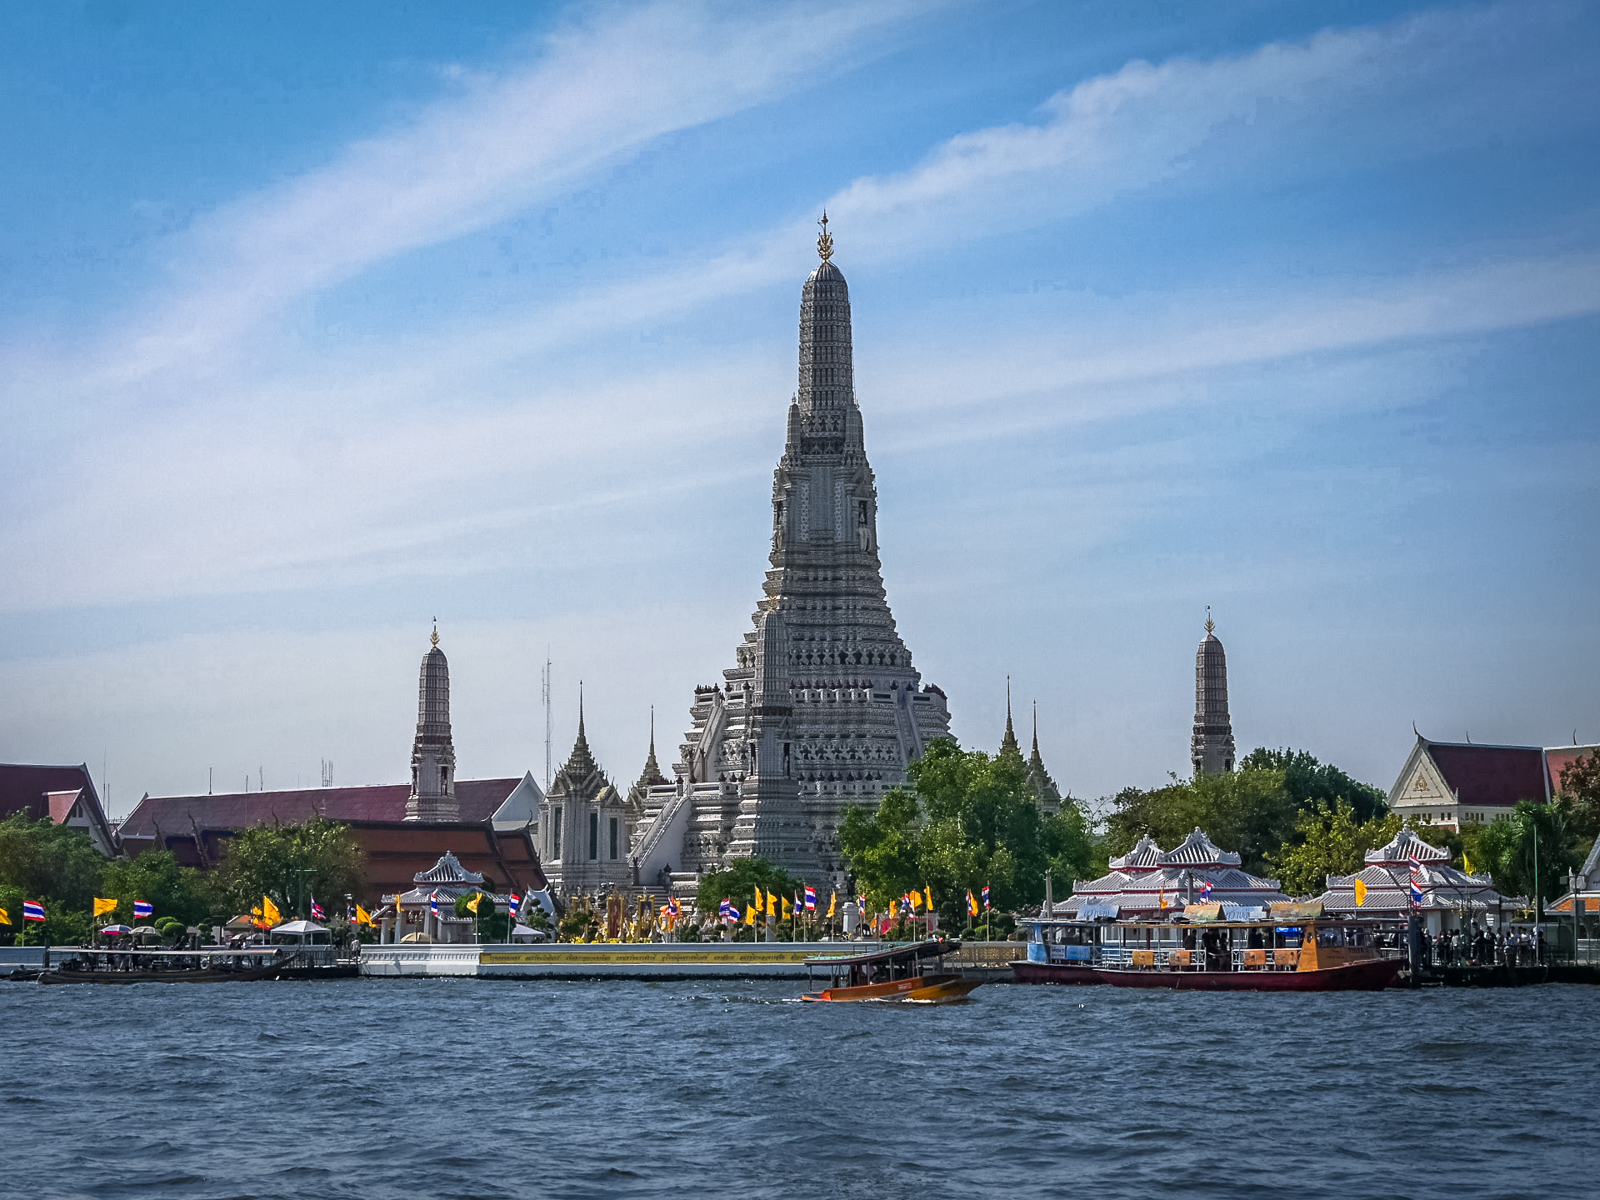 View of Wat Arun from the shuttle boat on the Chao Phraya RiverView of Wat Arun from the shuttle boat on the Chao Phraya River